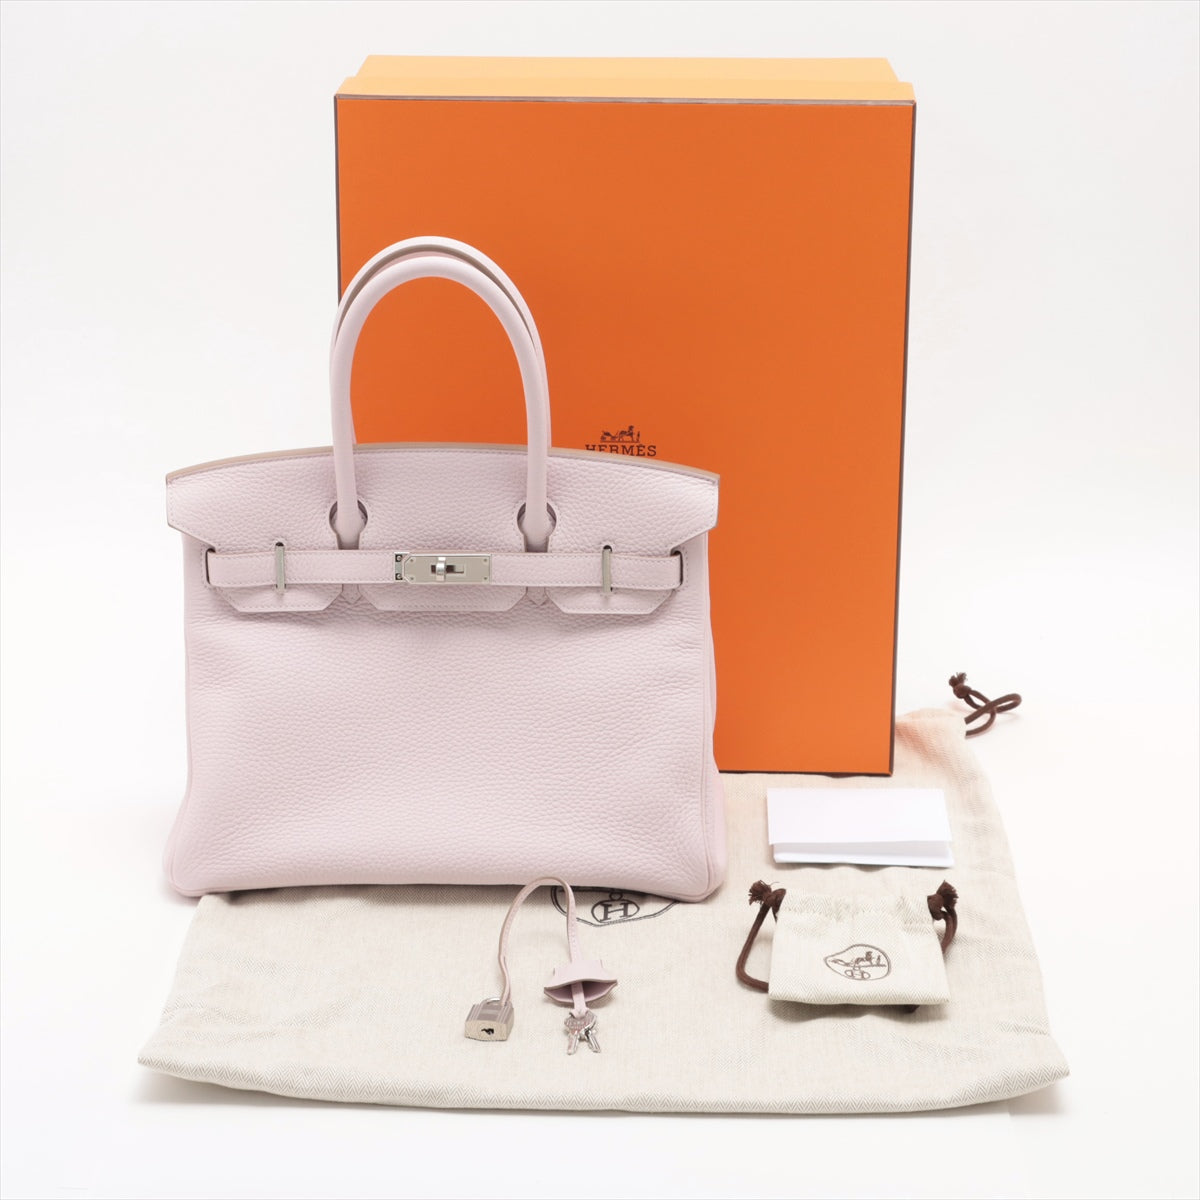 Hermes Bur 30 Trionclemence Move Pearl Silver